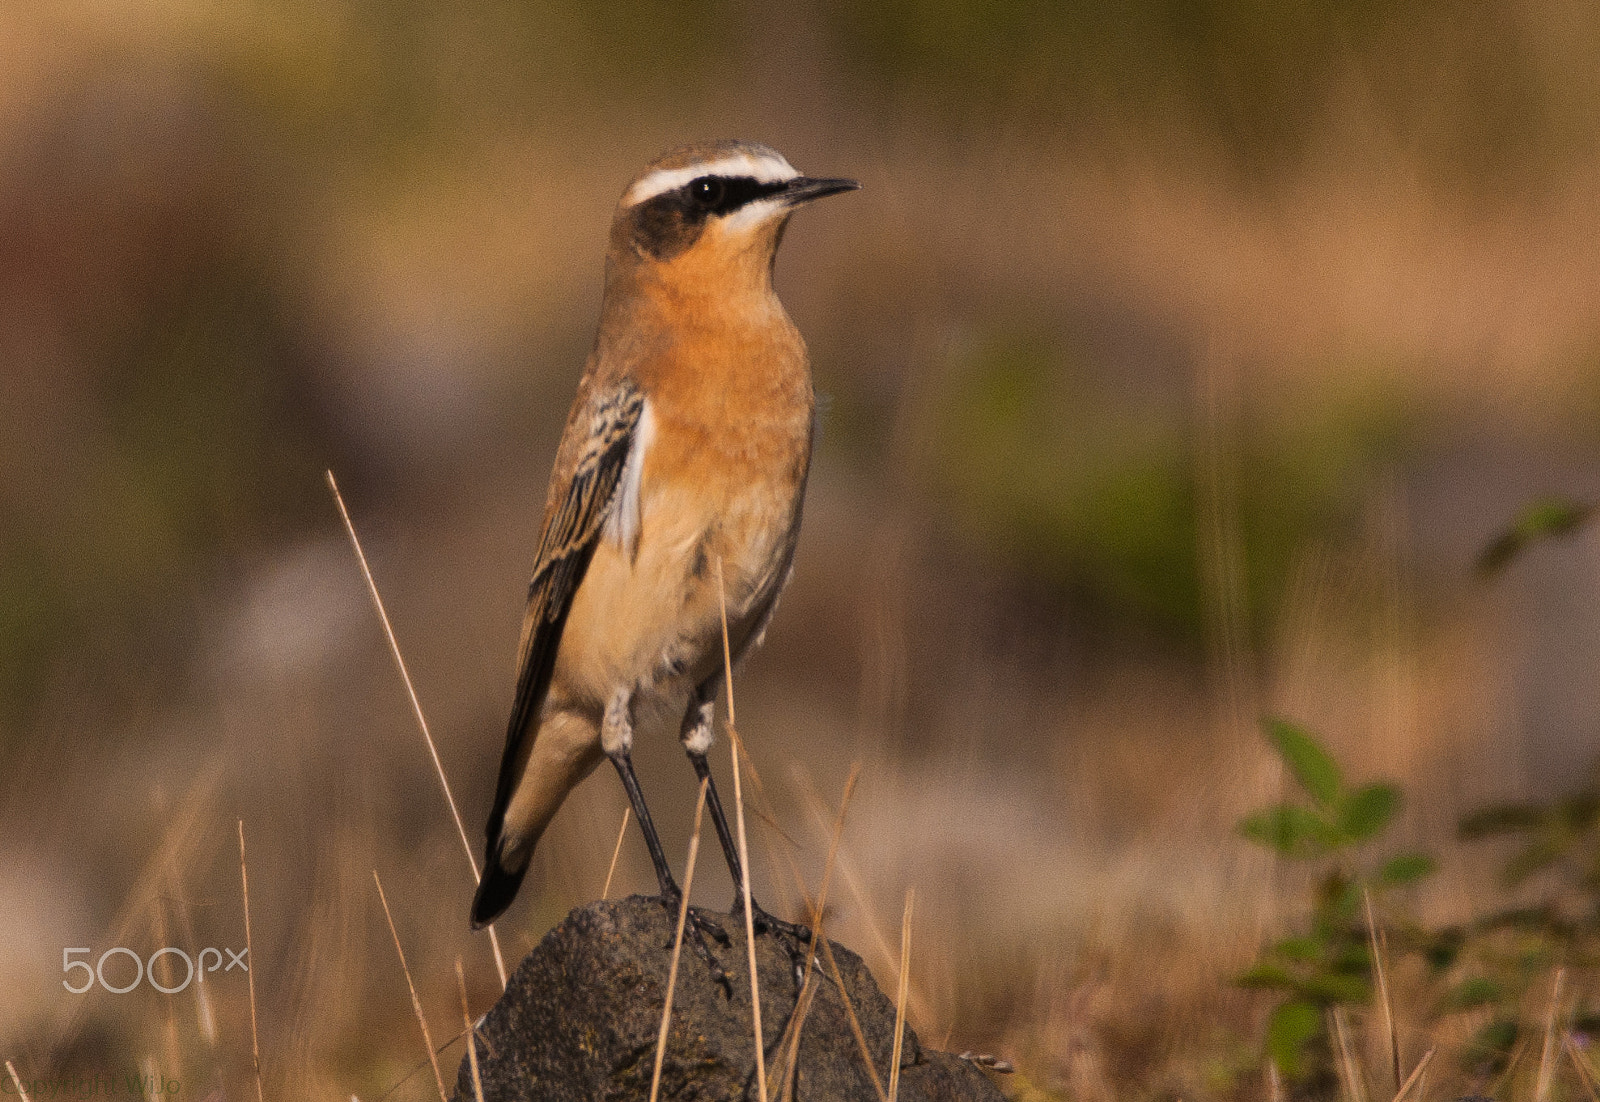 Nikon D90 + Sigma 150-600mm F5-6.3 DG OS HSM | C sample photo. Northern wheatear / tapuit photography